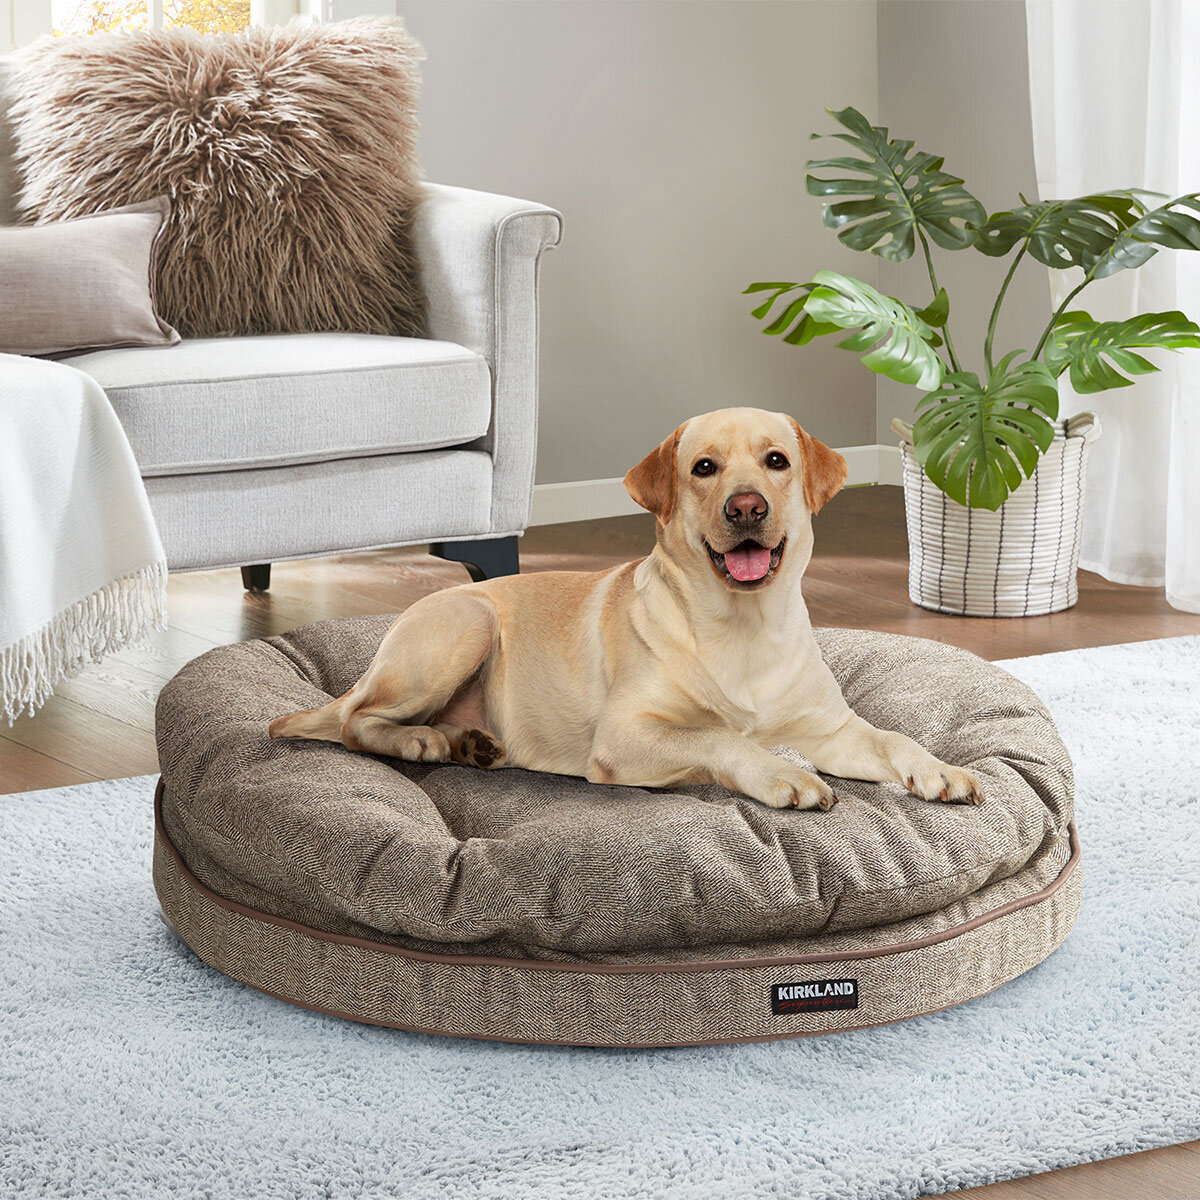 Kirkland Signature Round Pillow Orthopaedic Dog Bed in 6 Options